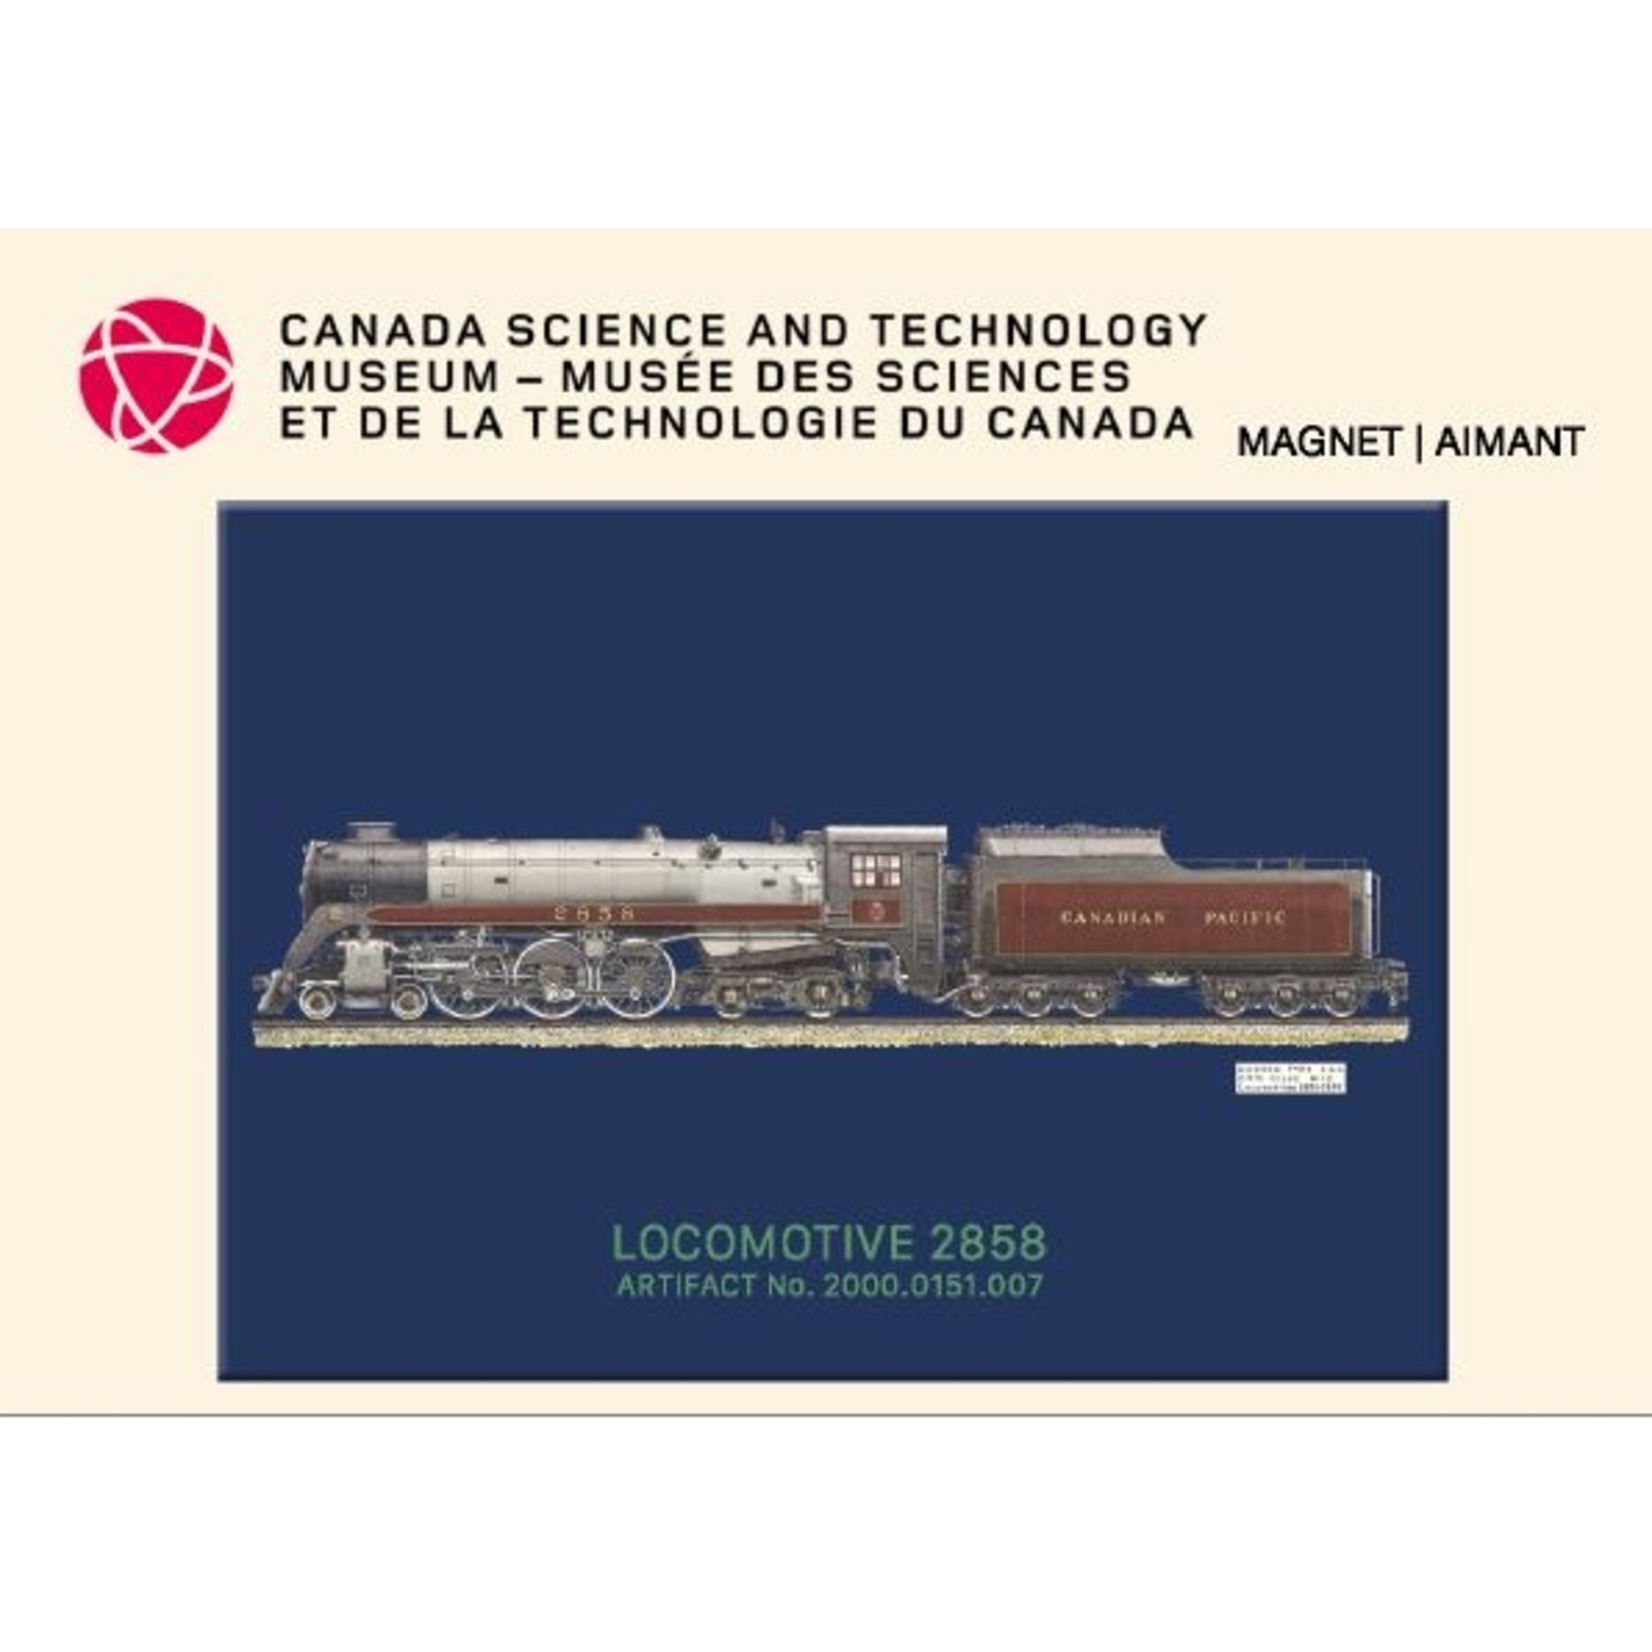 Science and Technology Locomotive 2858 Magnet